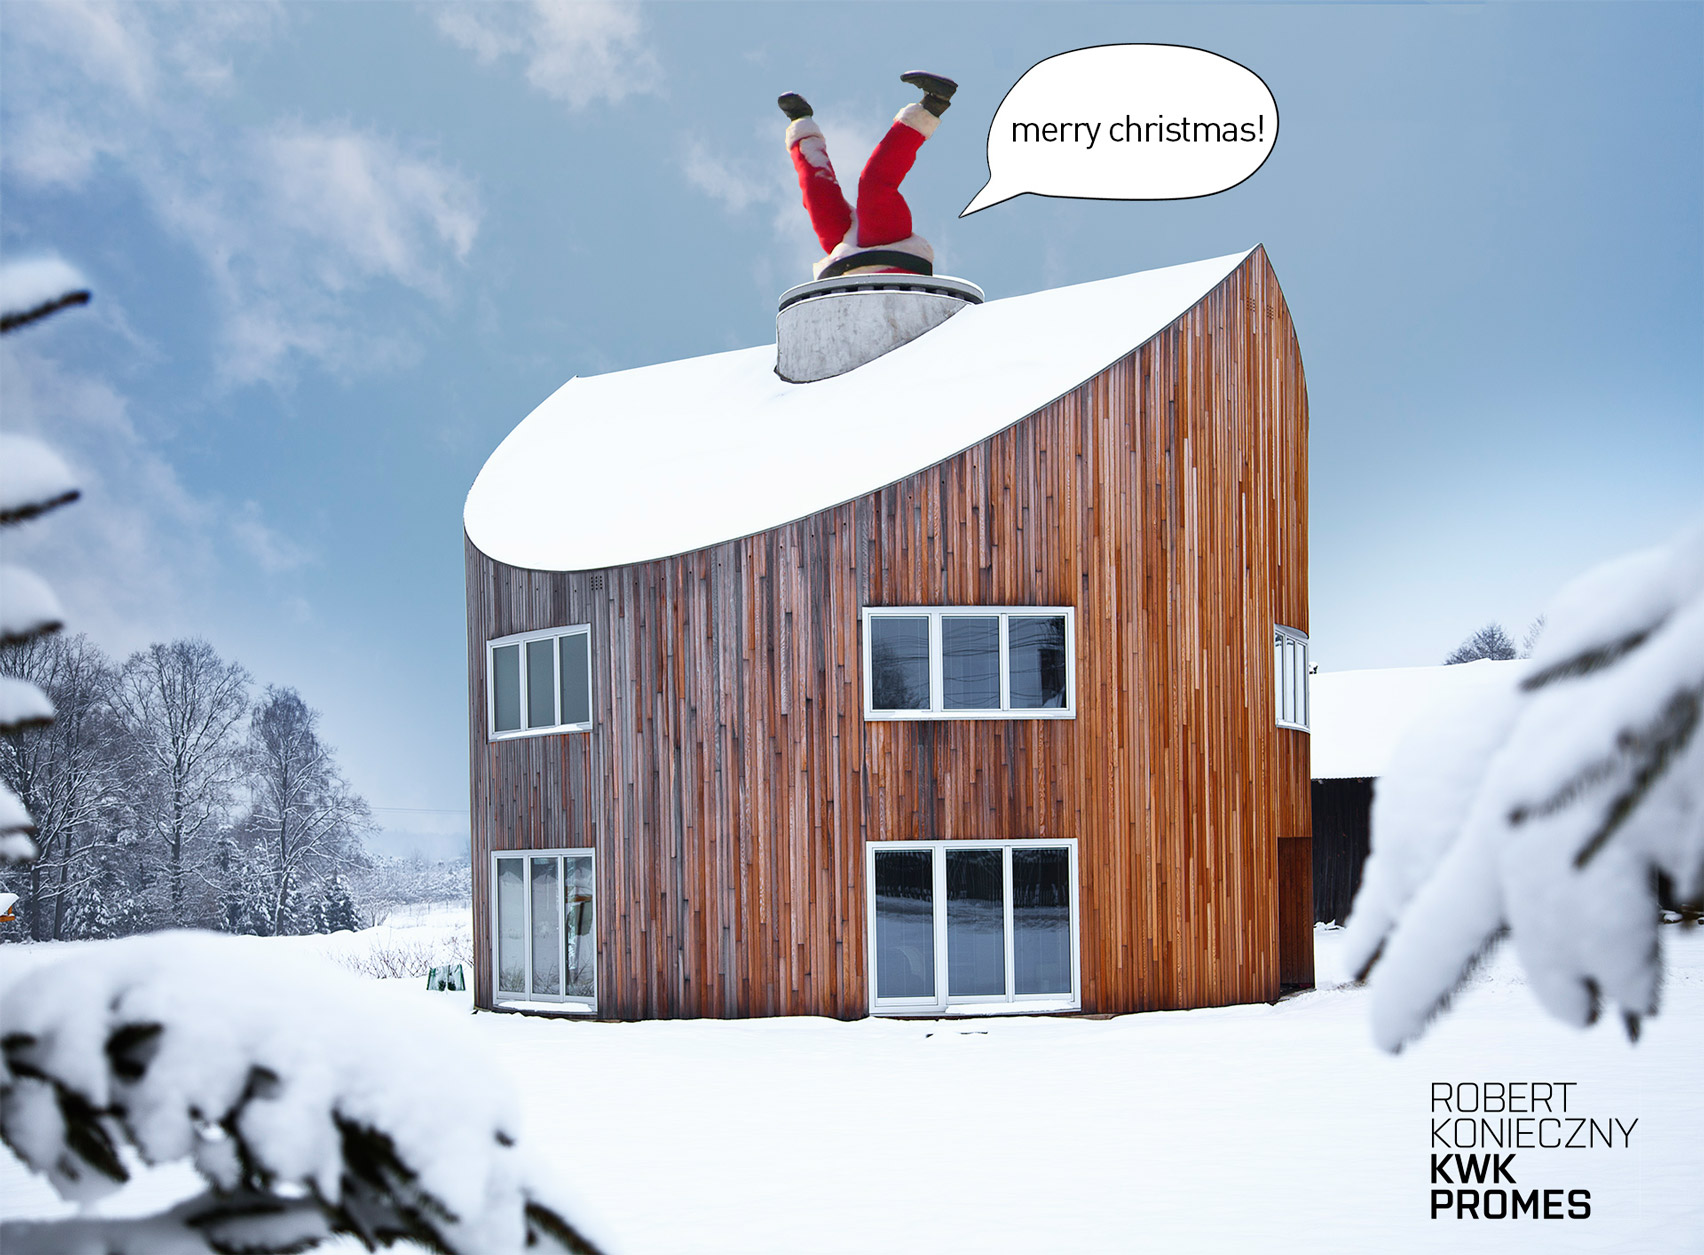 Christmas card by KMK Promes